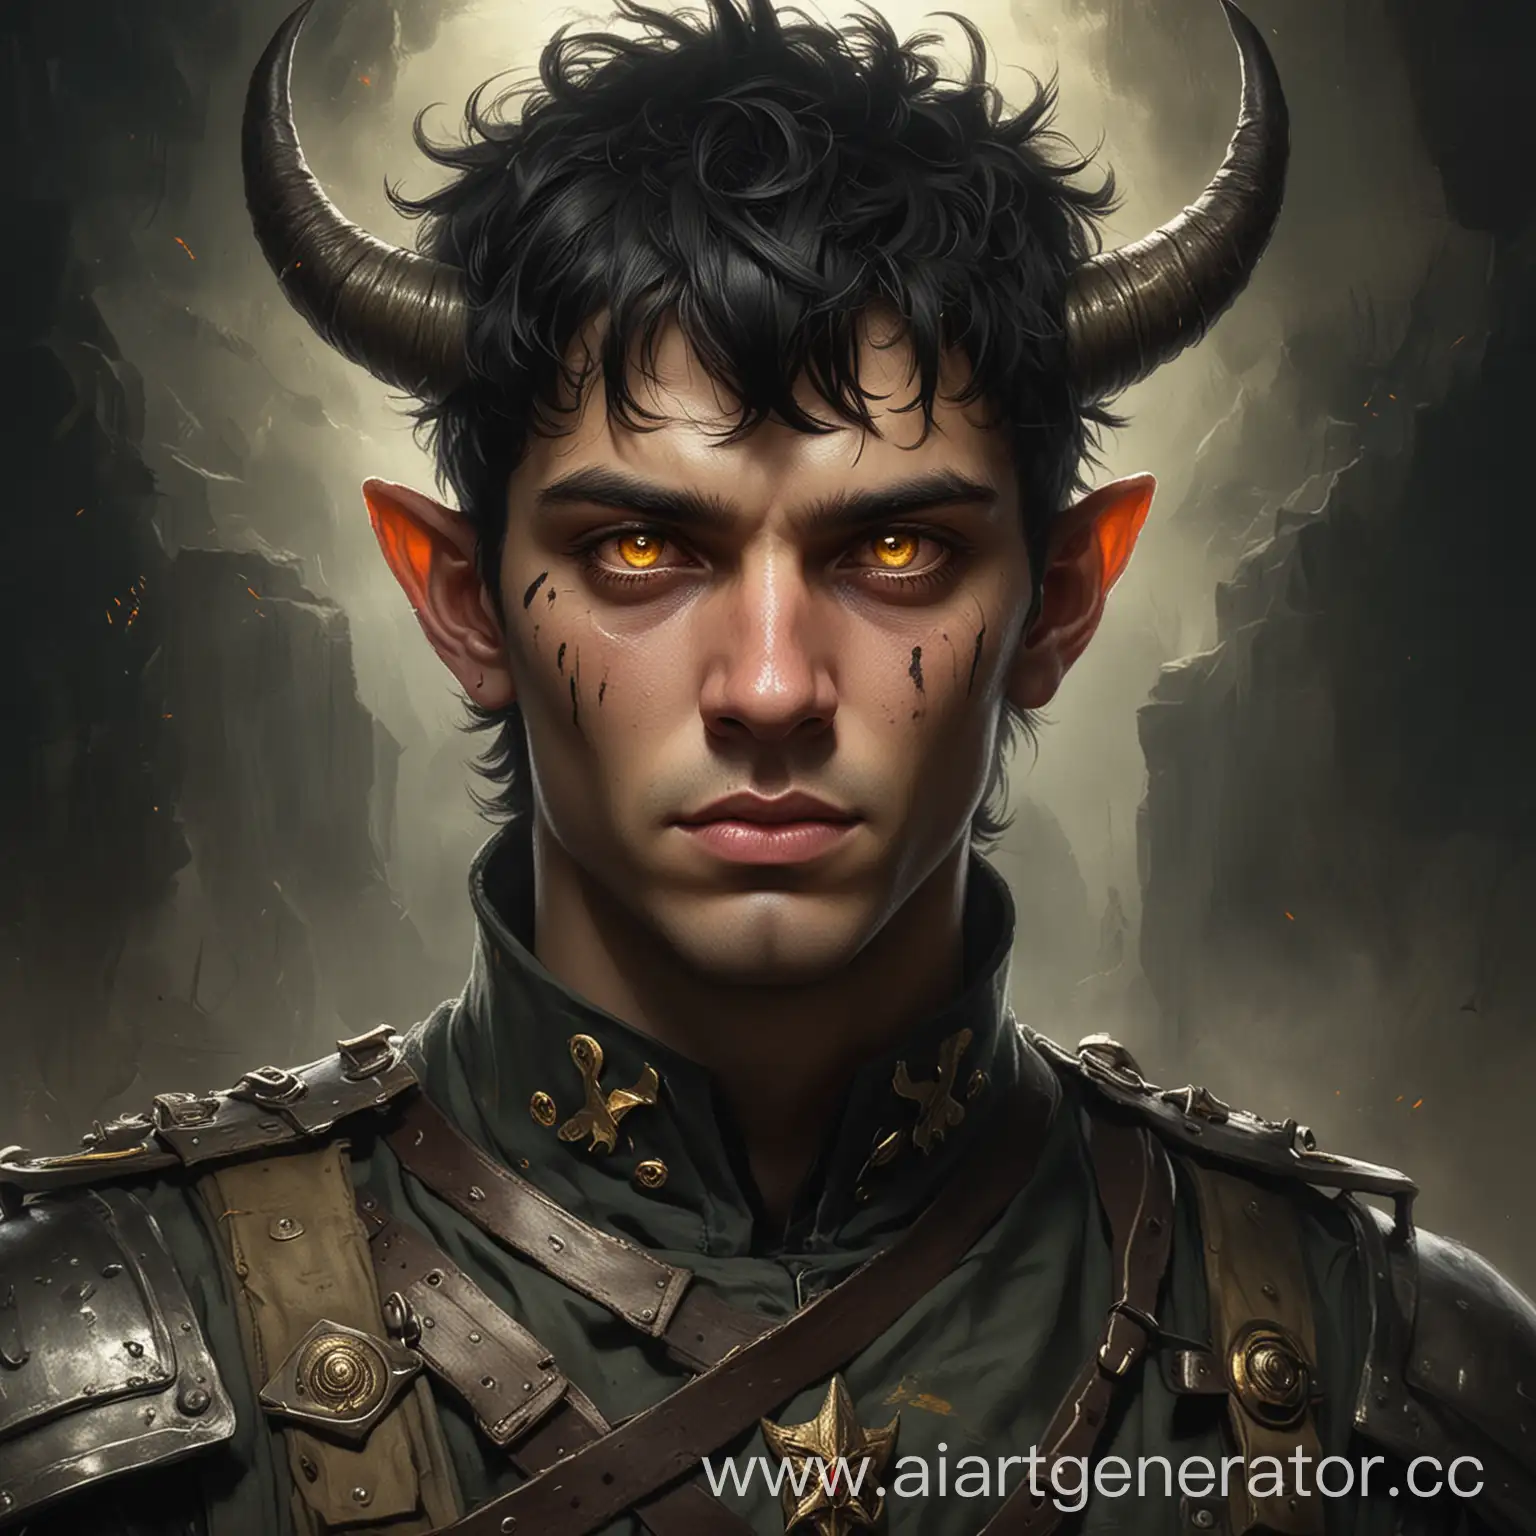 Young-Man-Soldier-with-Glowing-Yellow-Eyes-and-Horned-Tiefling